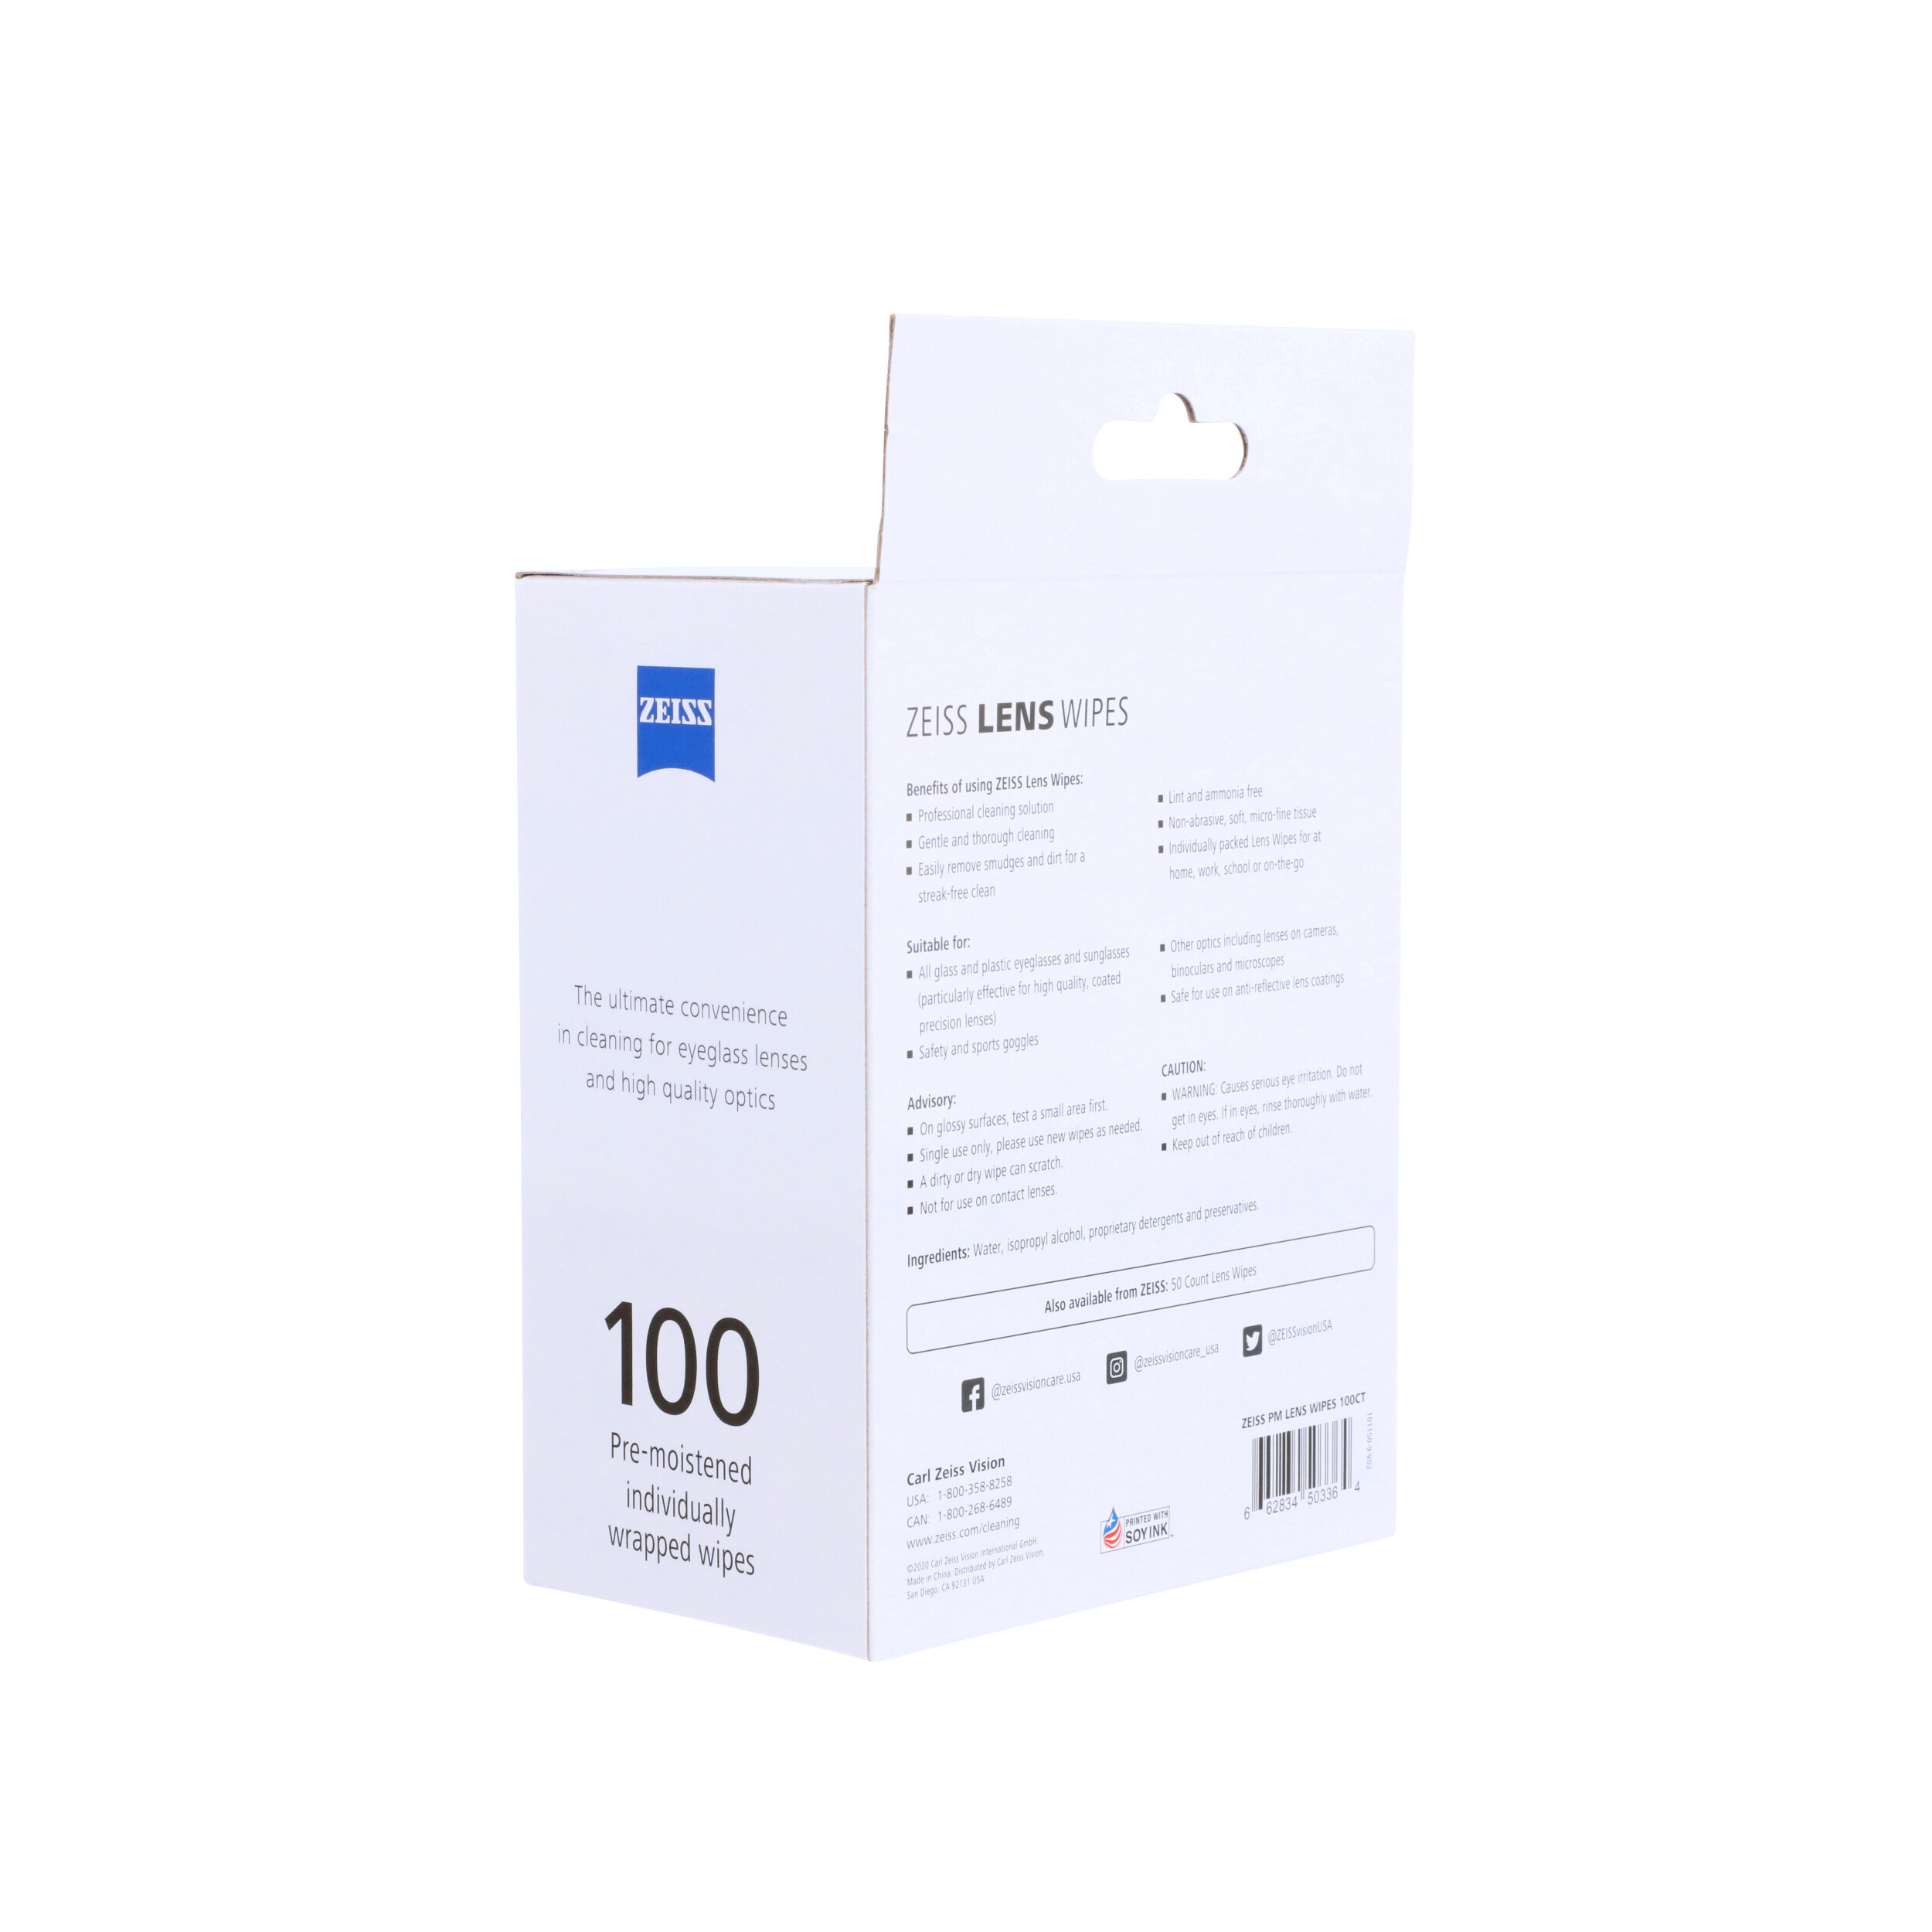 ZEISS Lens Wipes, Pre-Moistened Eye Glass Cleaner Wipes, 100 Count -  DroneUp Delivery